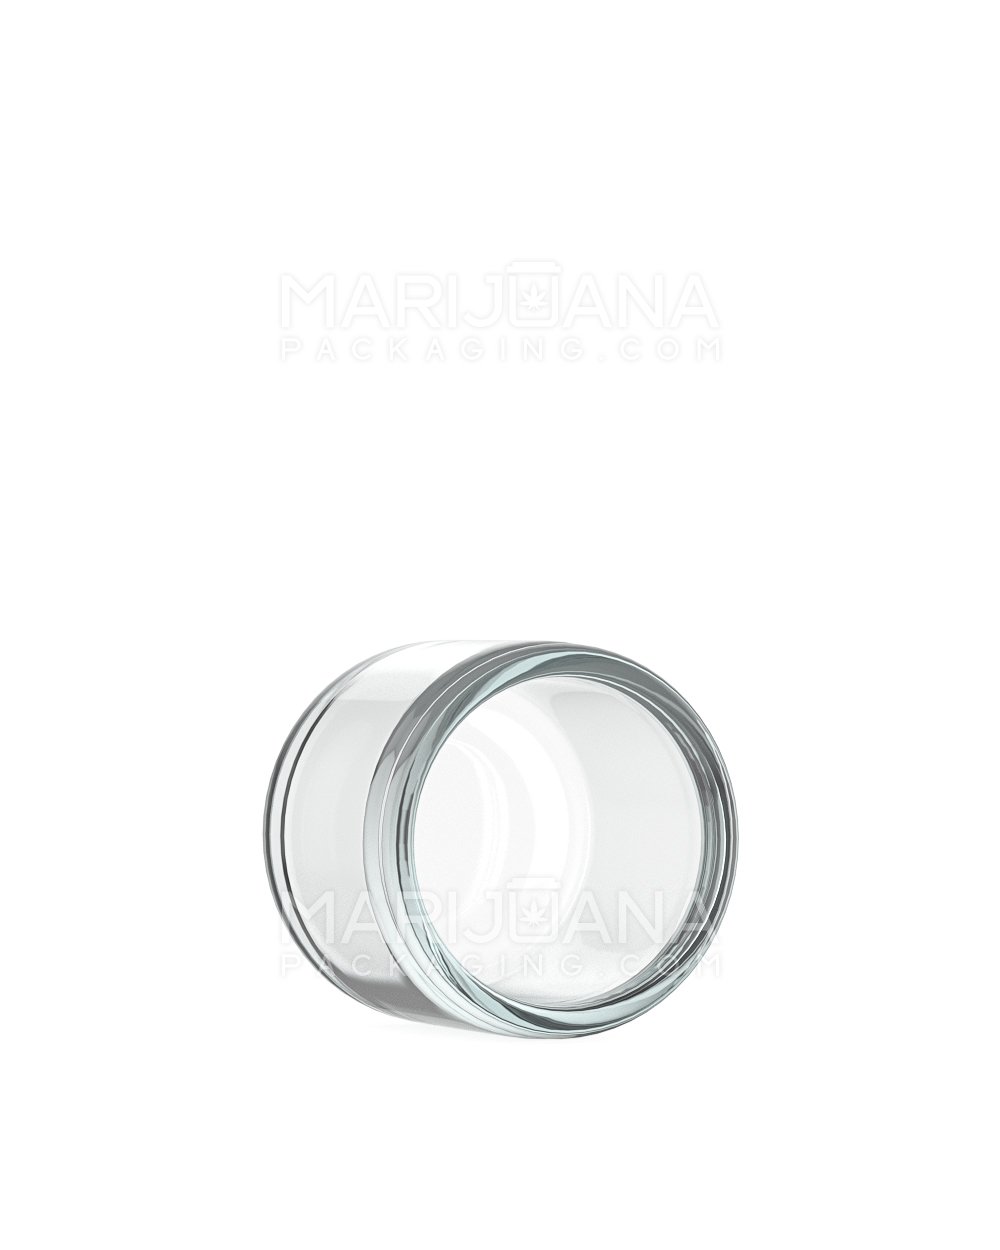 No Neck Clear Glass Concentrate Containers | 23mm - 6mL - 144 Count - 4